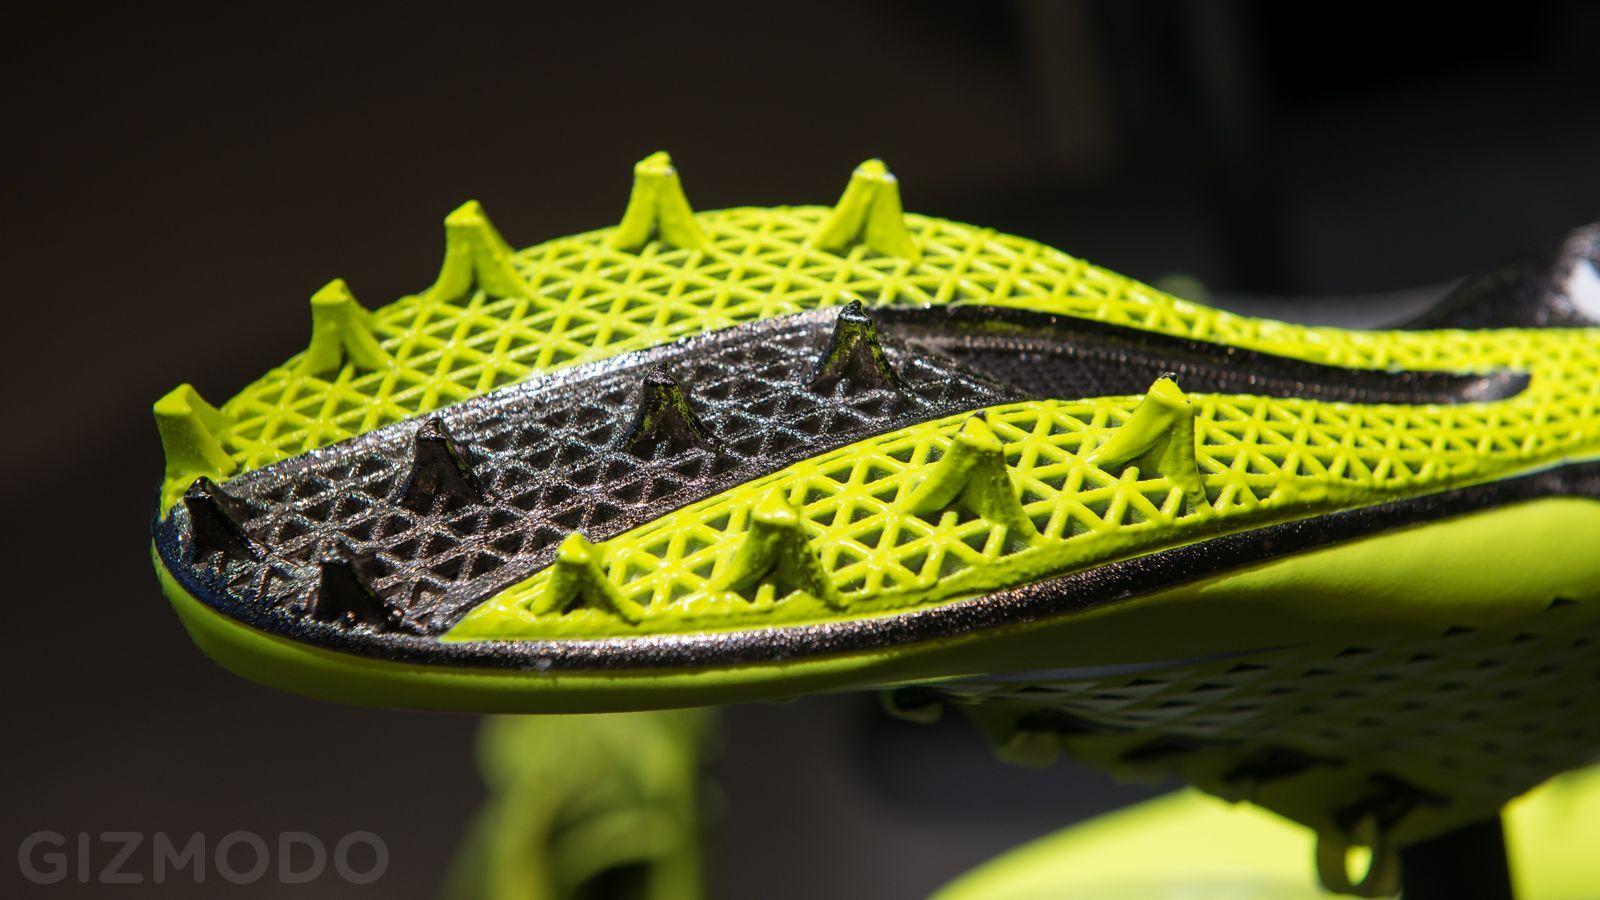 How 3D Printing Supercharged Nike&;s New Super Bowl Cleat. Gizmodo